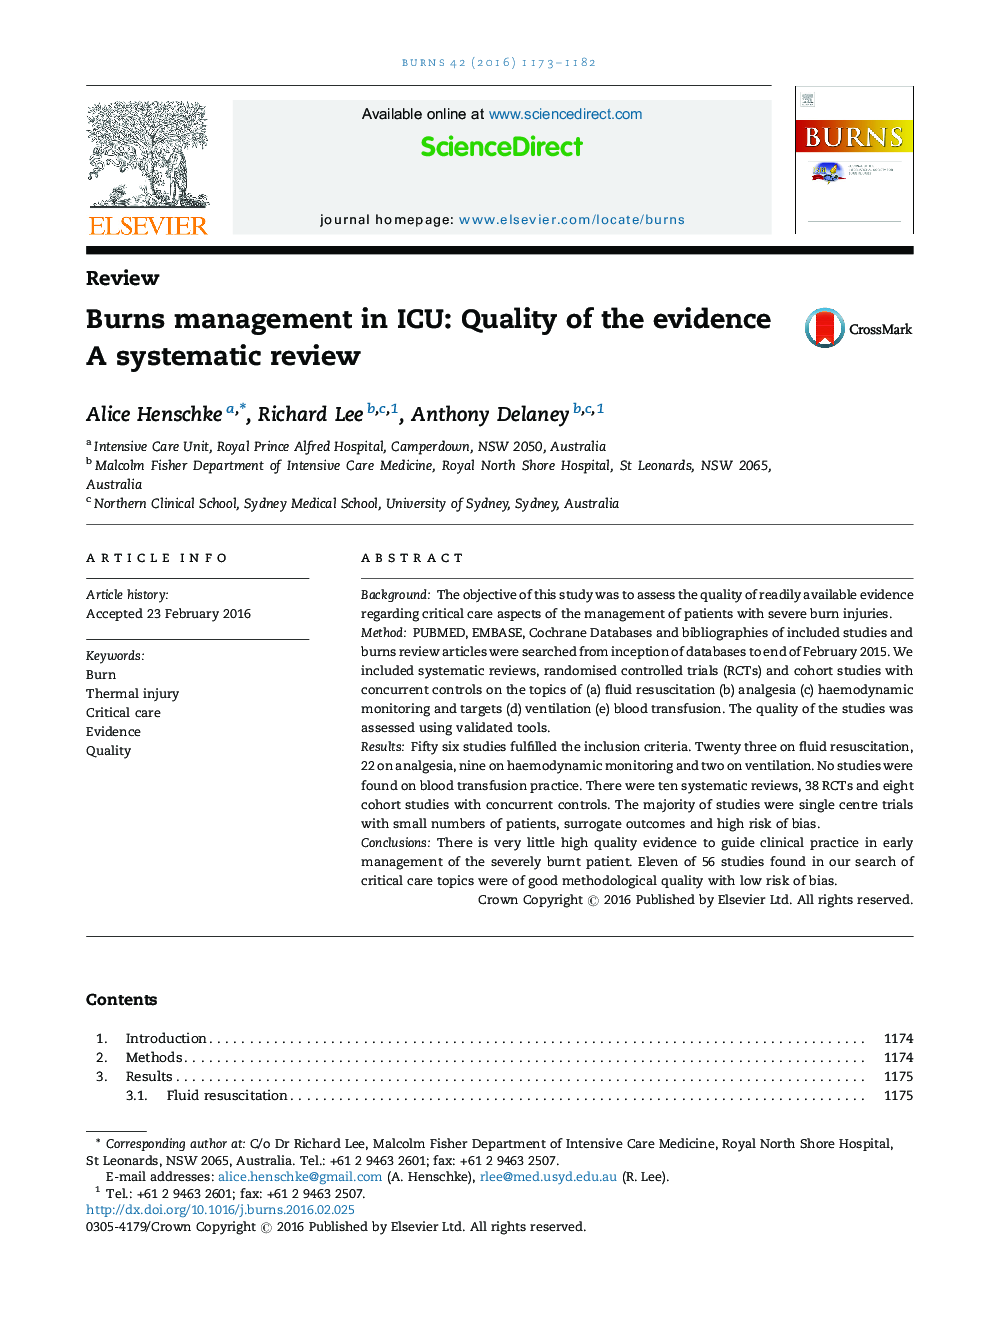 Burns management in ICU: Quality of the evidence: A systematic review